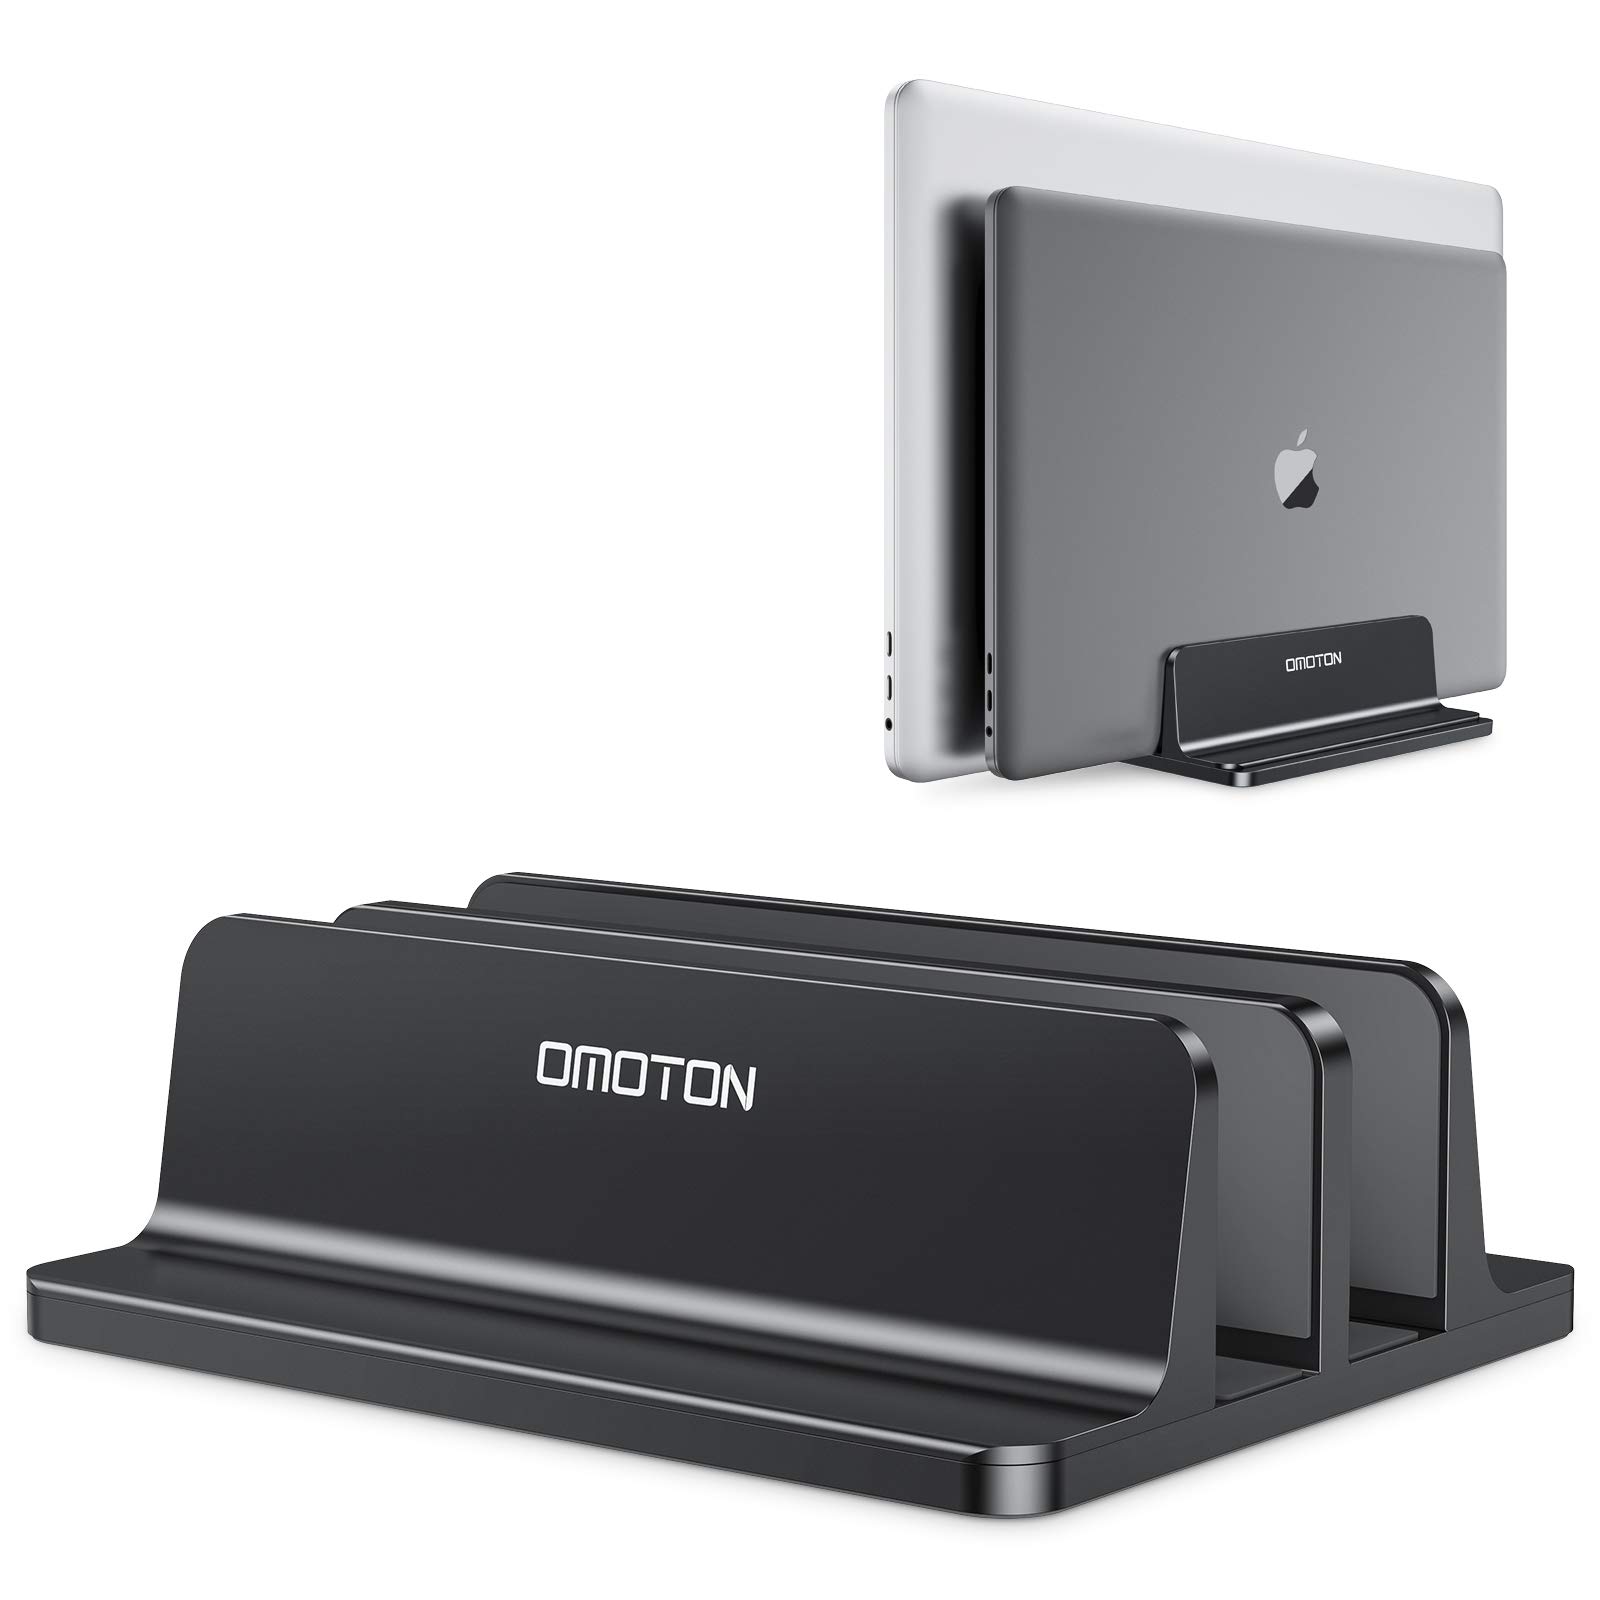 Book Cover OMOTON [Updated Dock Version] Vertical Laptop Stand, Double Desktop Stand Holder with Adjustable Dock (Up to 17.3 inch), Fits All MacBook/Surface/Samsung/HP/Dell/Chrome Book (Black)